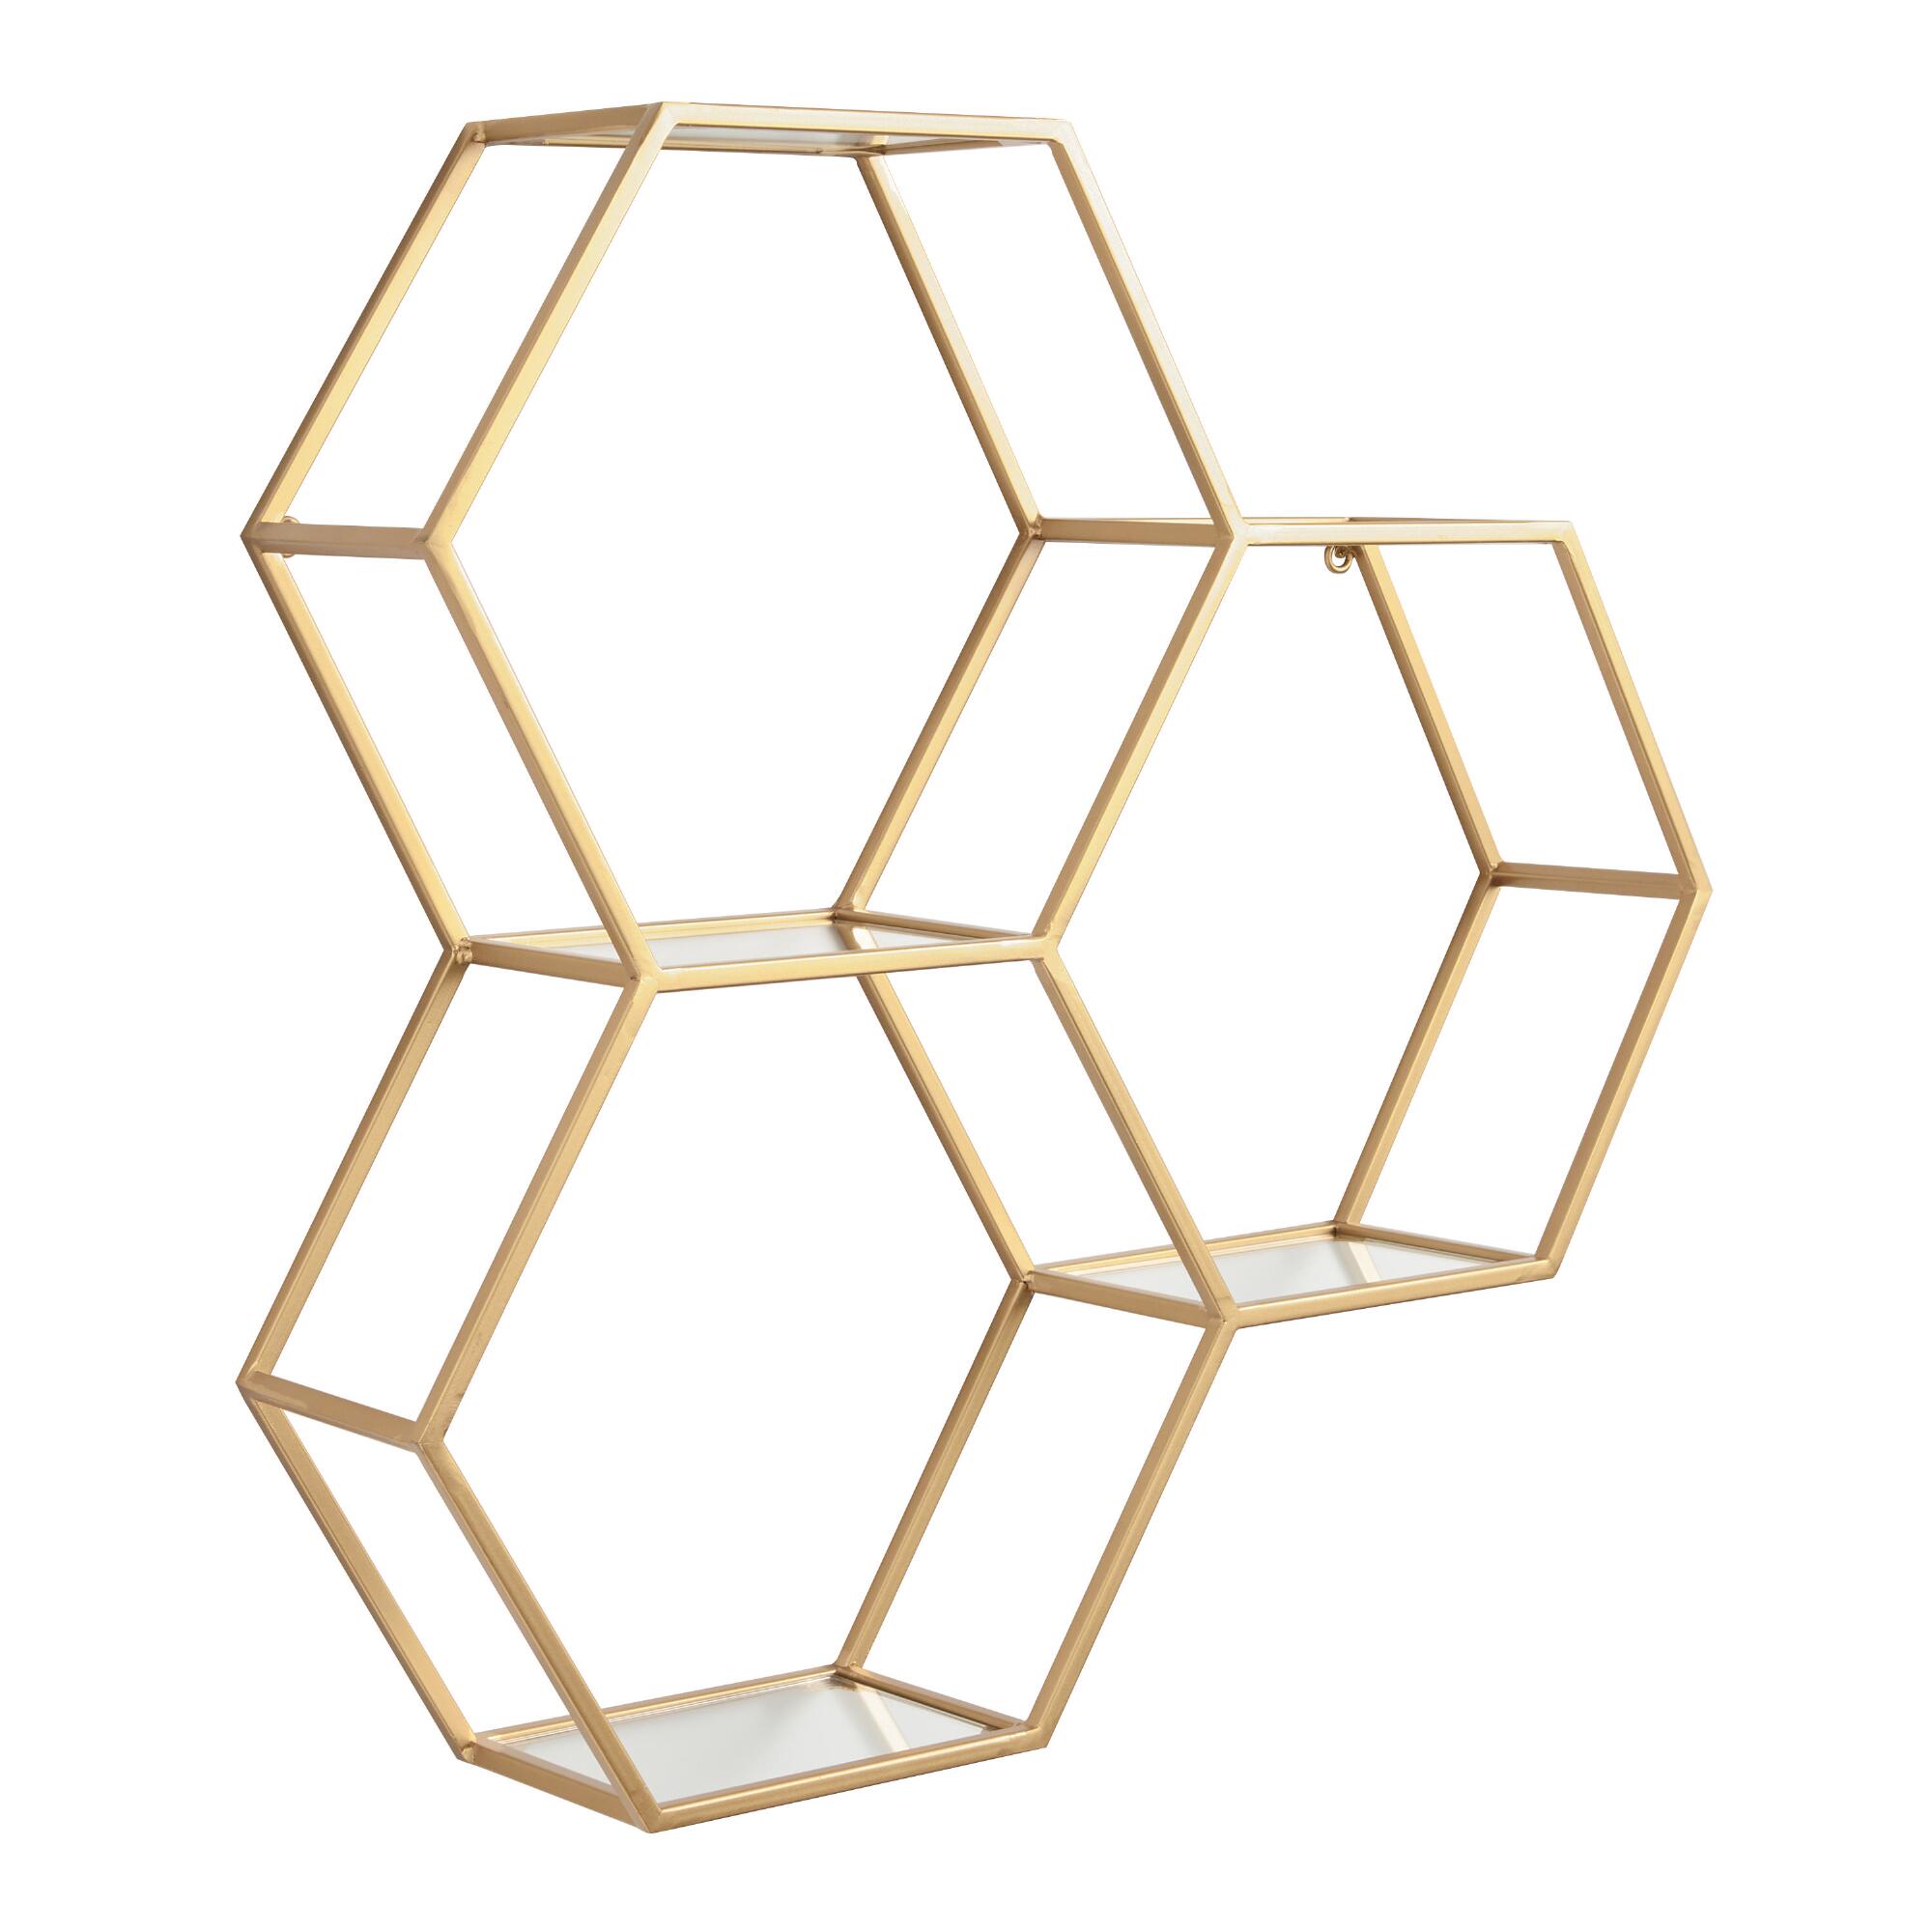 Gold and Glass Honeycomb Wall Shelf - Metal by World Market